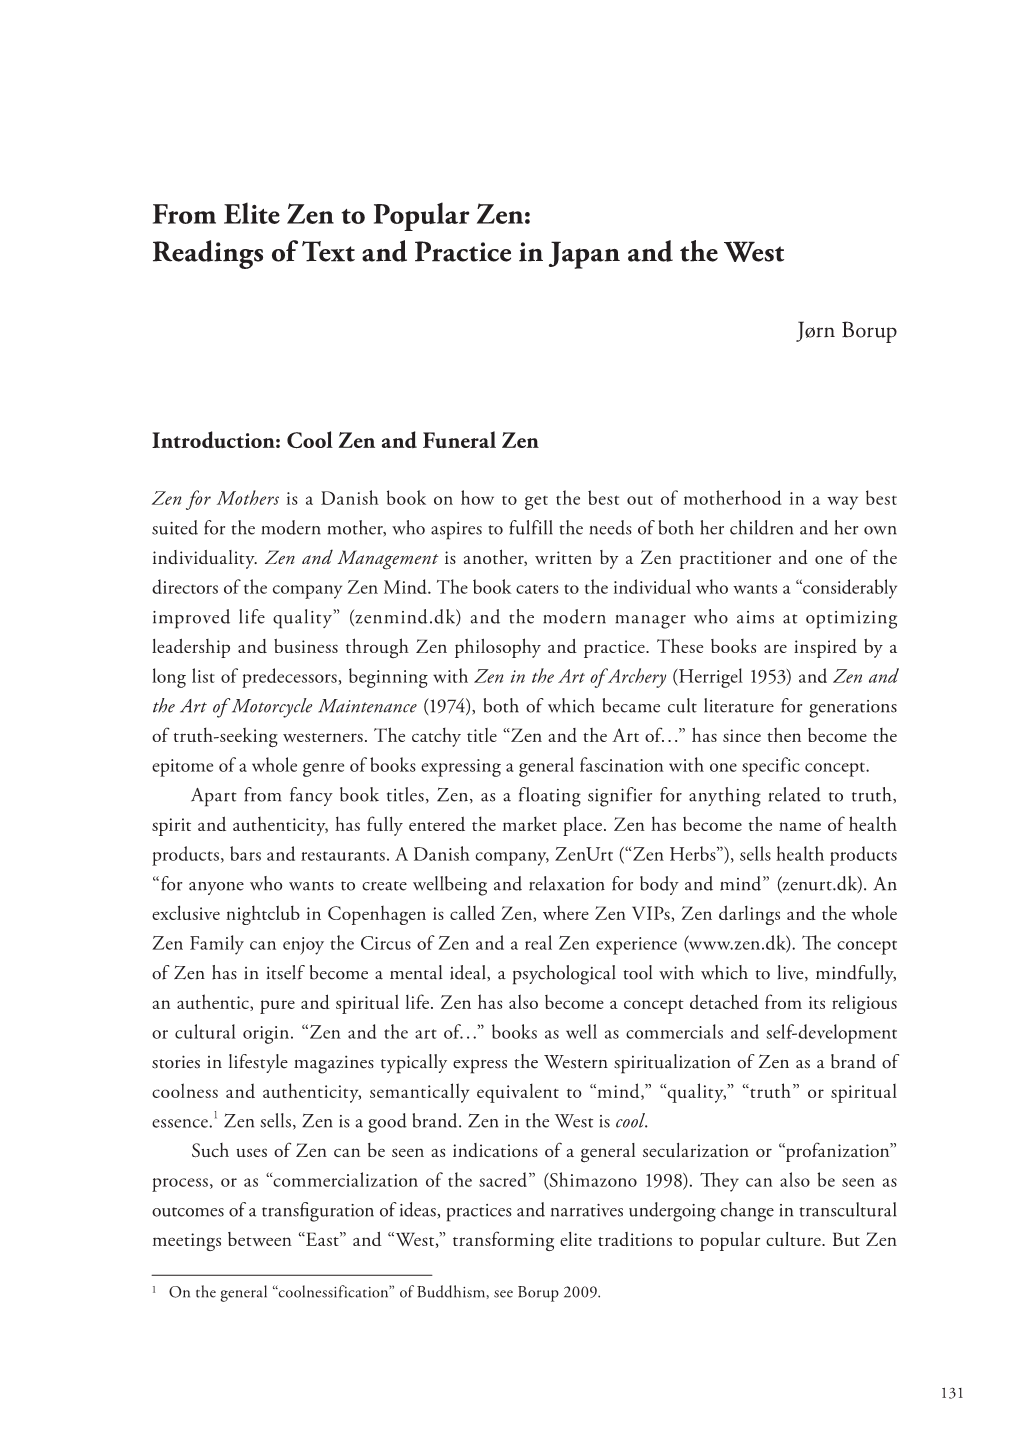 From Elite Zen to Popular Zen: Readings of Text and Practice in Japan and the West